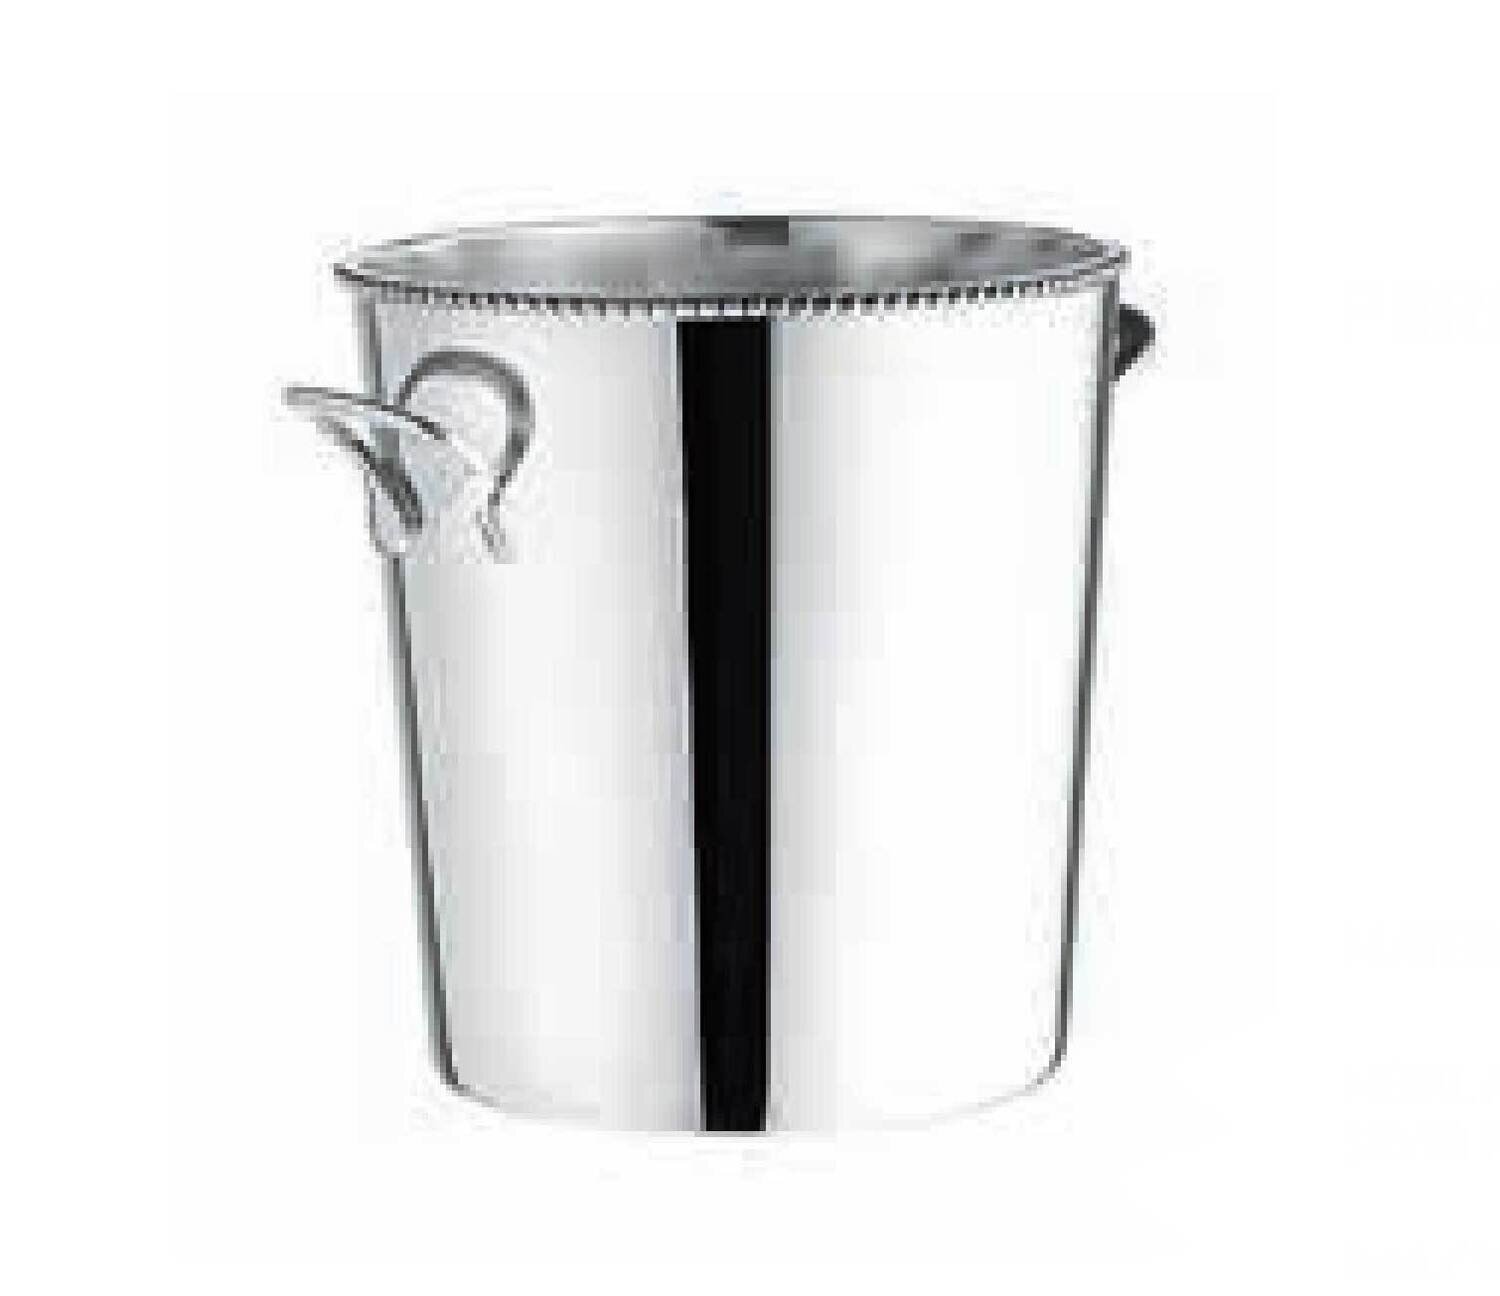 Ercuis Perles Champagne Bucket 7.875 Inch Silver Plated F505101-20